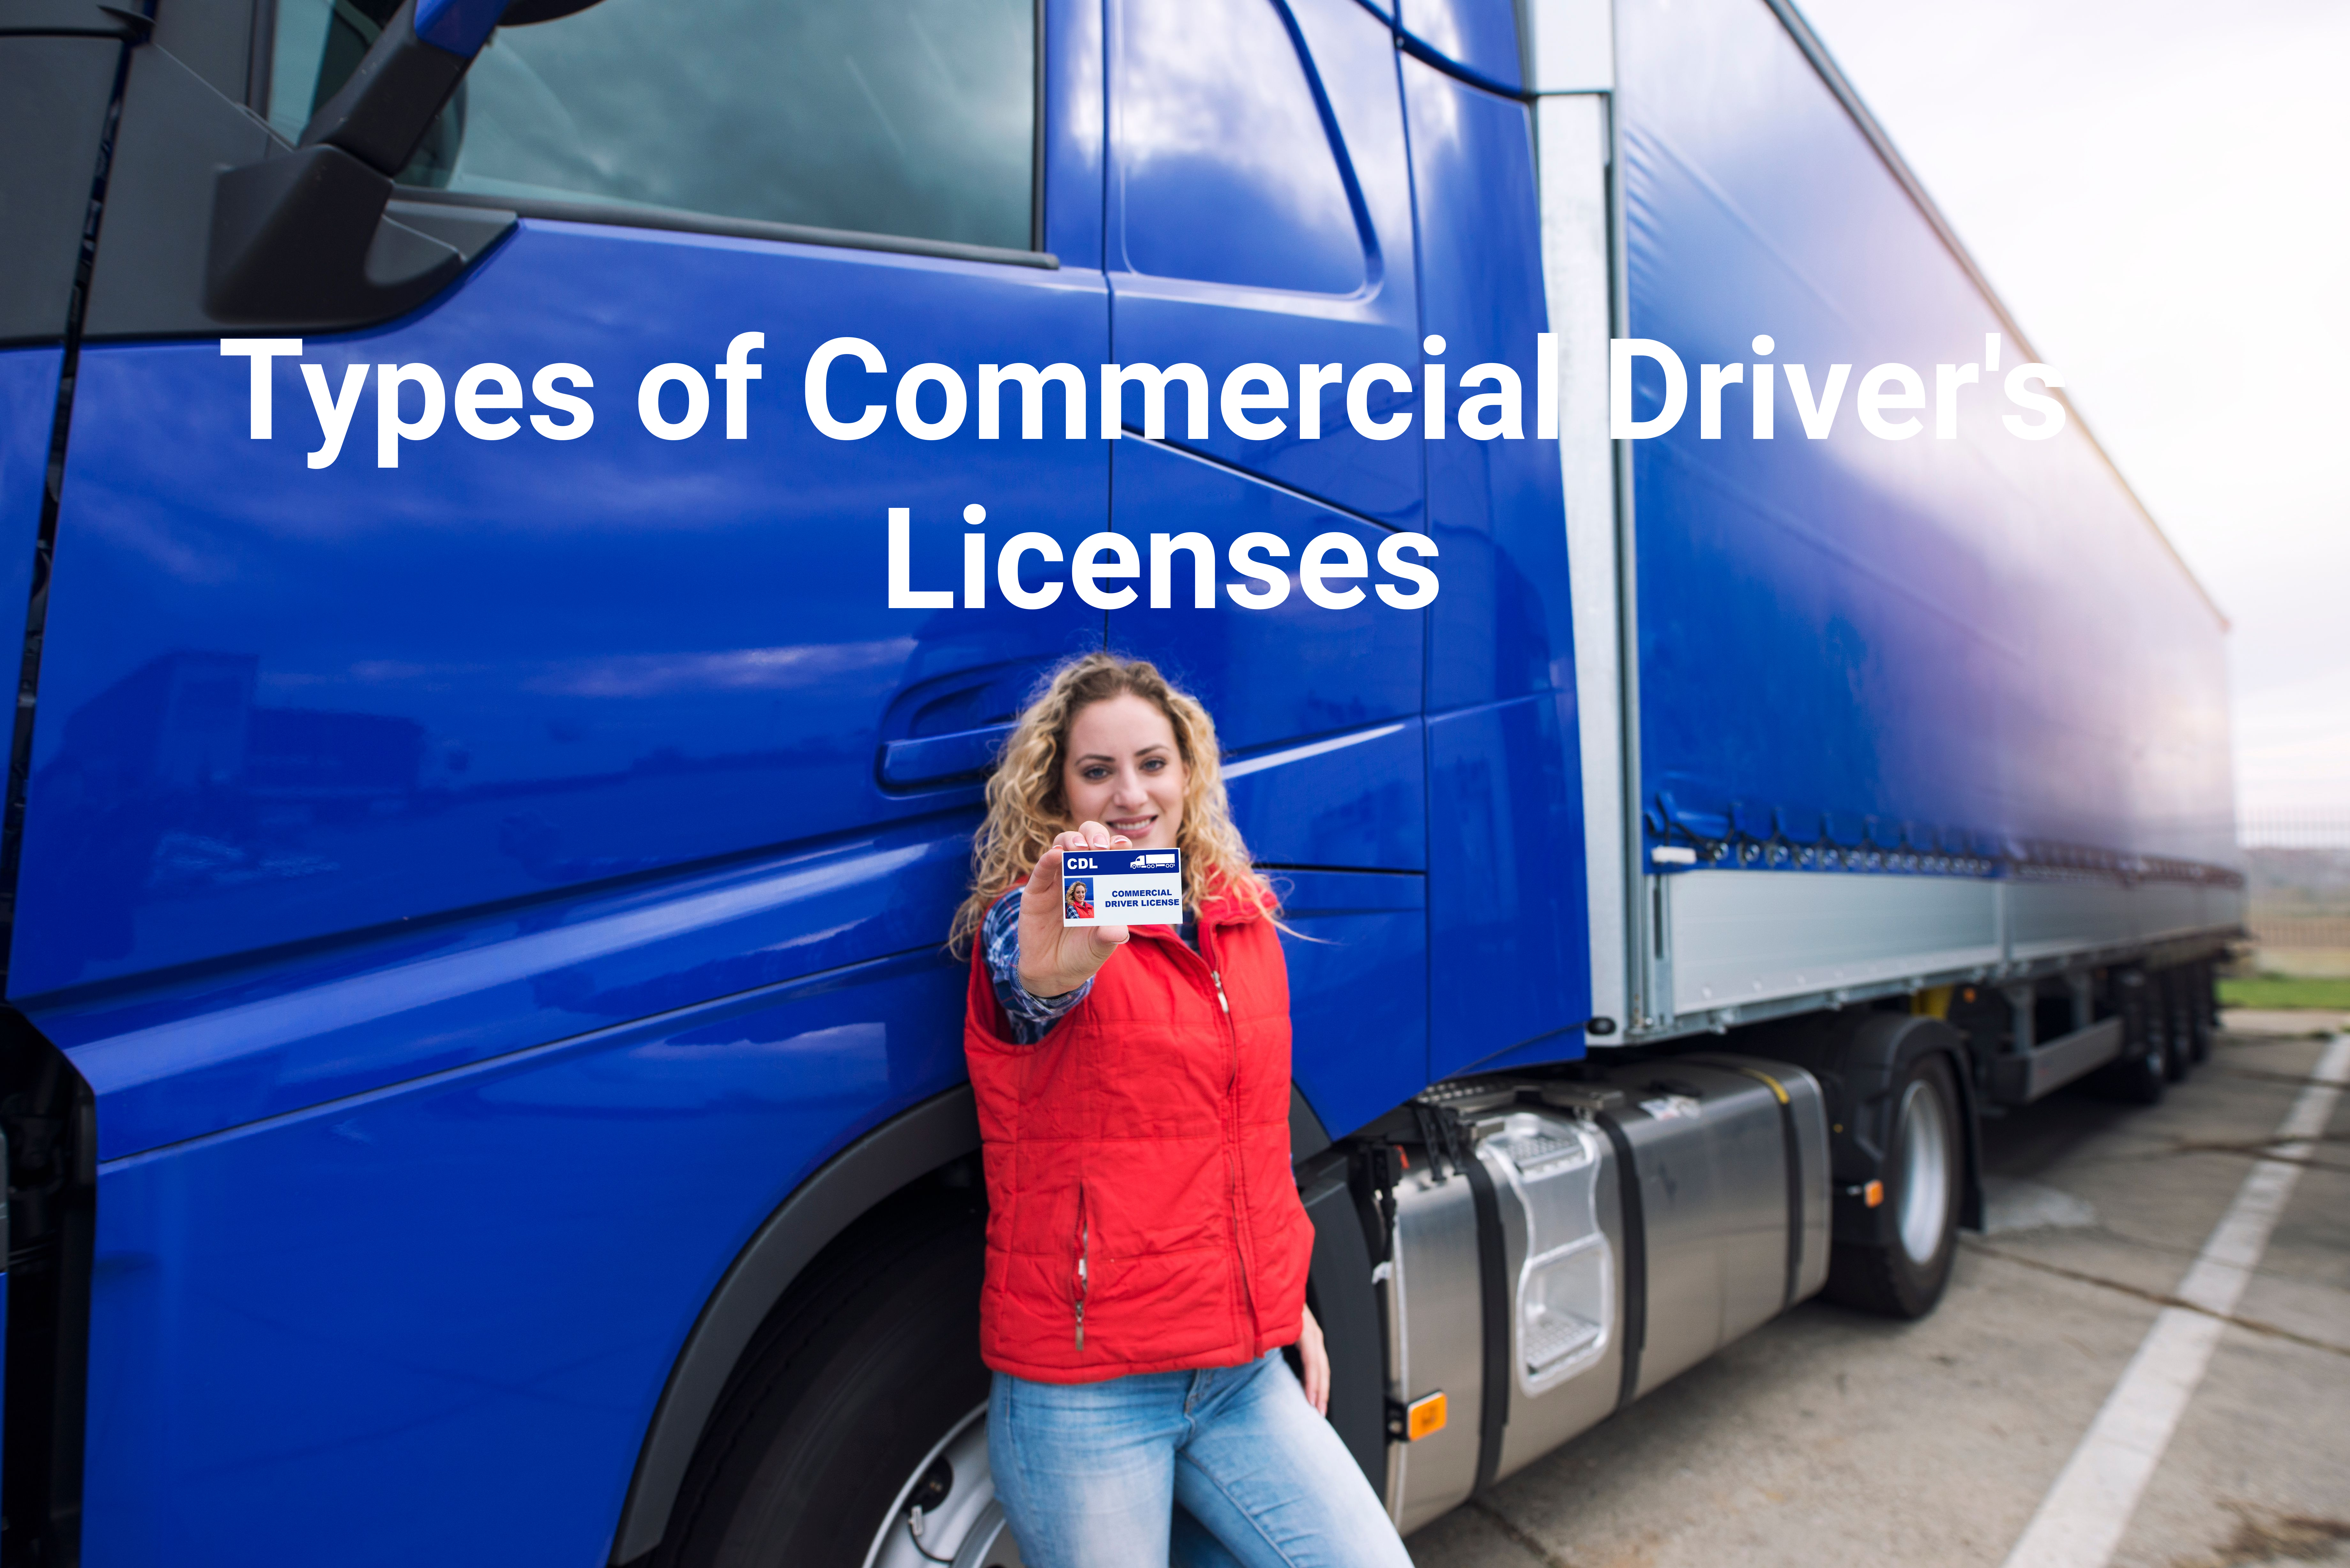 Types of commercial driver's licenses